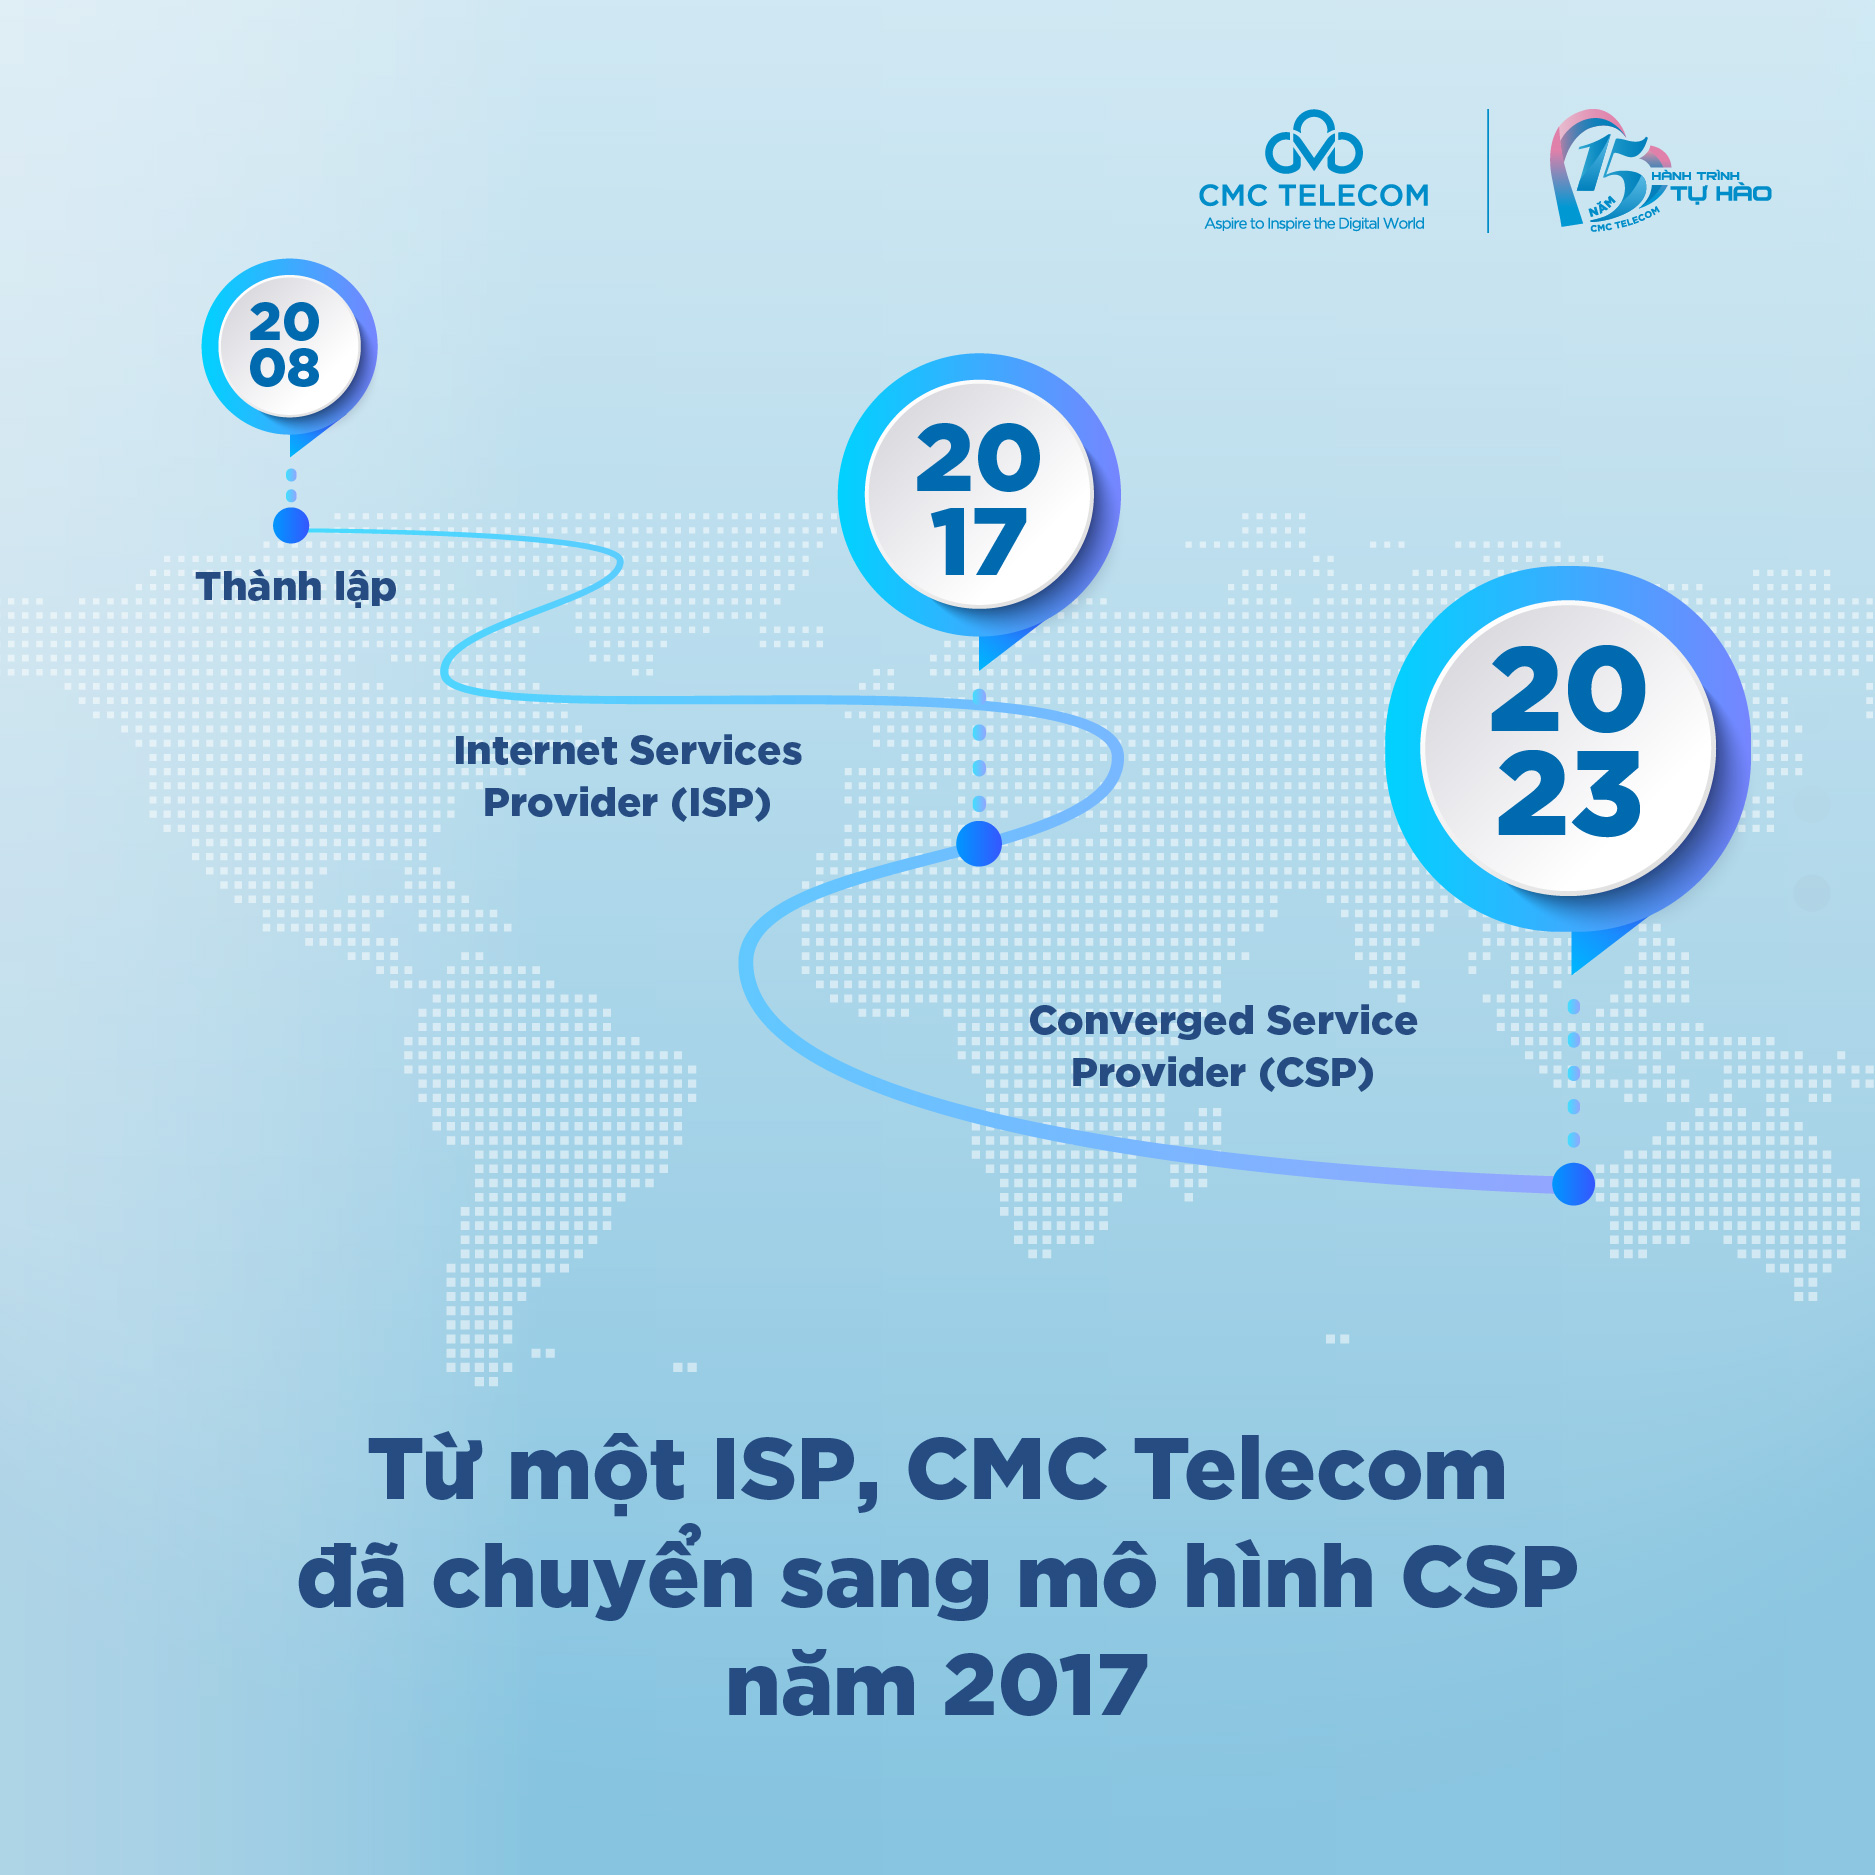 From ISP to CSP: The 15-year journey of CMC Telecom